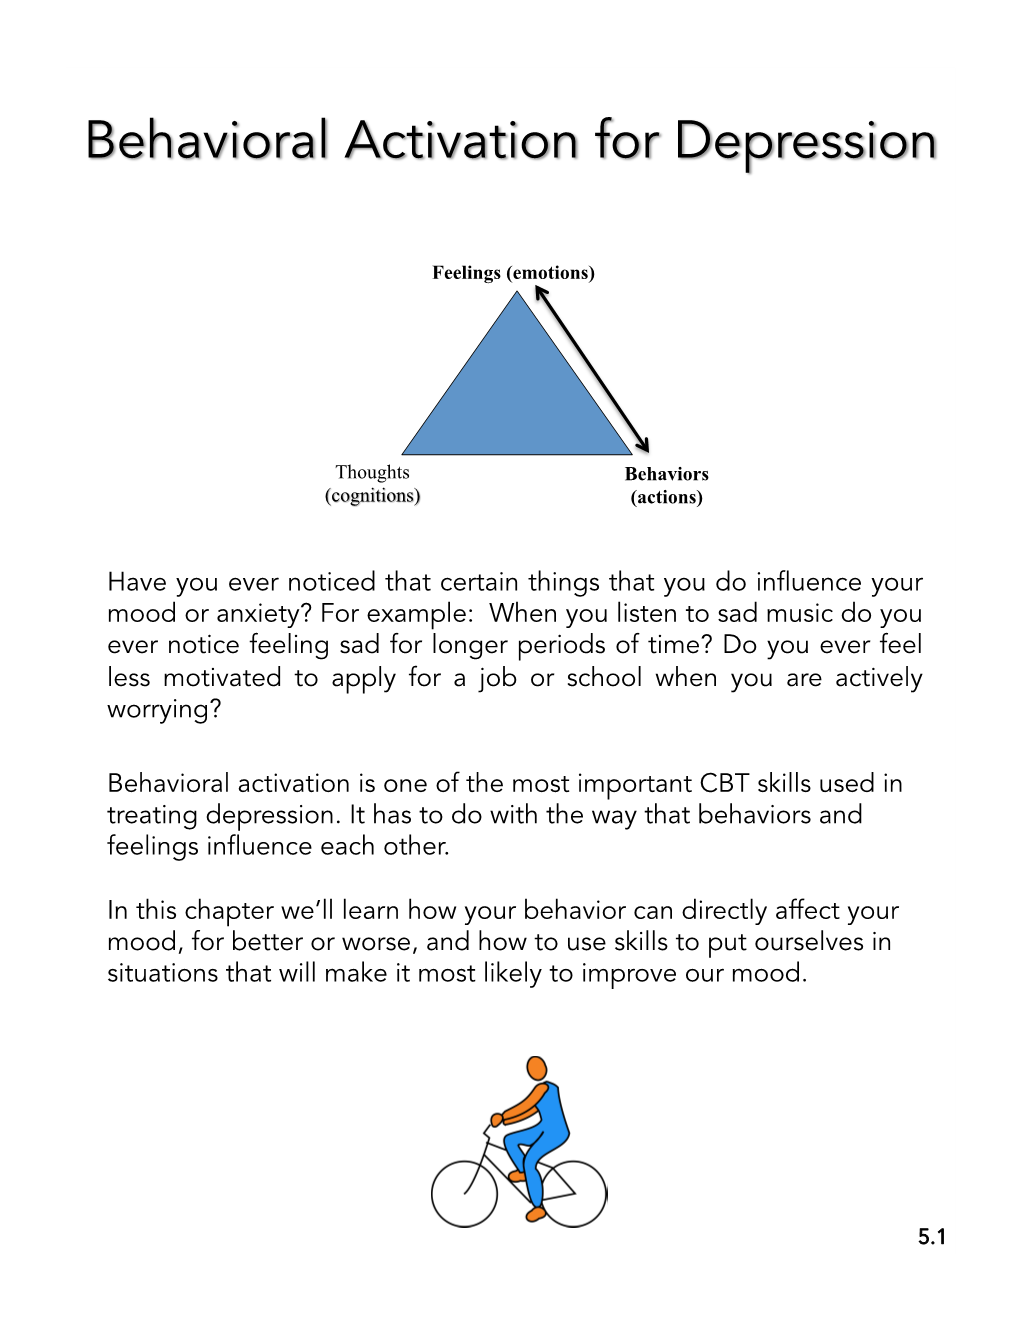 Behavioral Activation Is One of the Most Important CBT Skills Used in Treating Depression